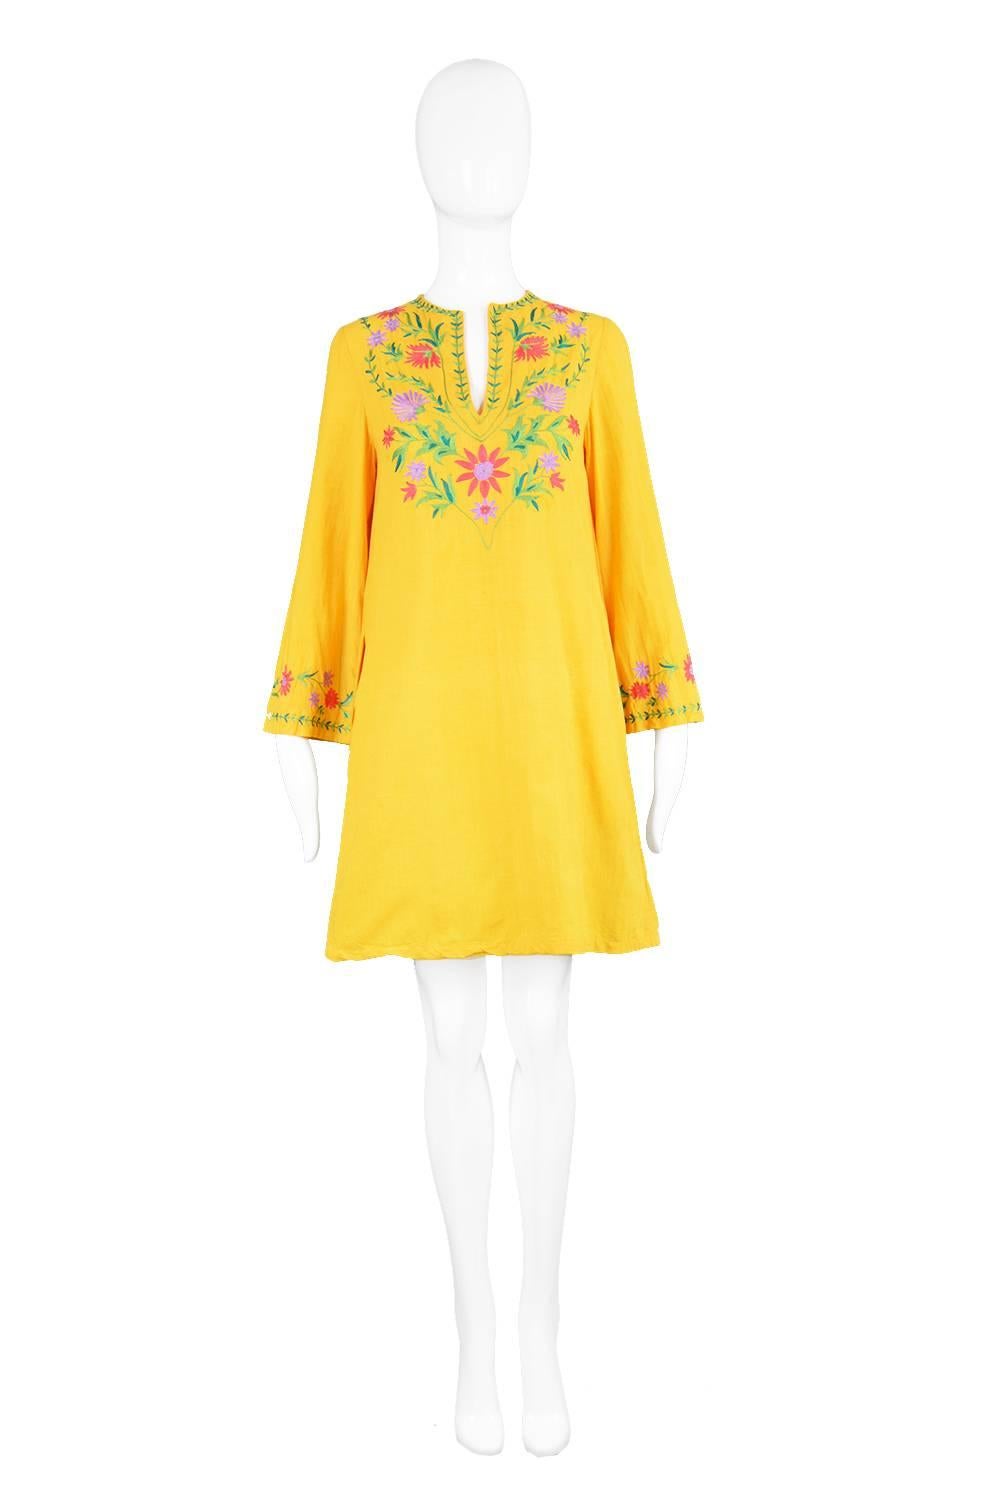 A vibrant and summery vintage dress from the 1970s by iconic and highly collectible British designer, Treacy Lowe. In a similar vein to Thea Porter and Gina Fratini, Treacy Lowe designed her luxurious, ethnic inspired clothes around her idea of a